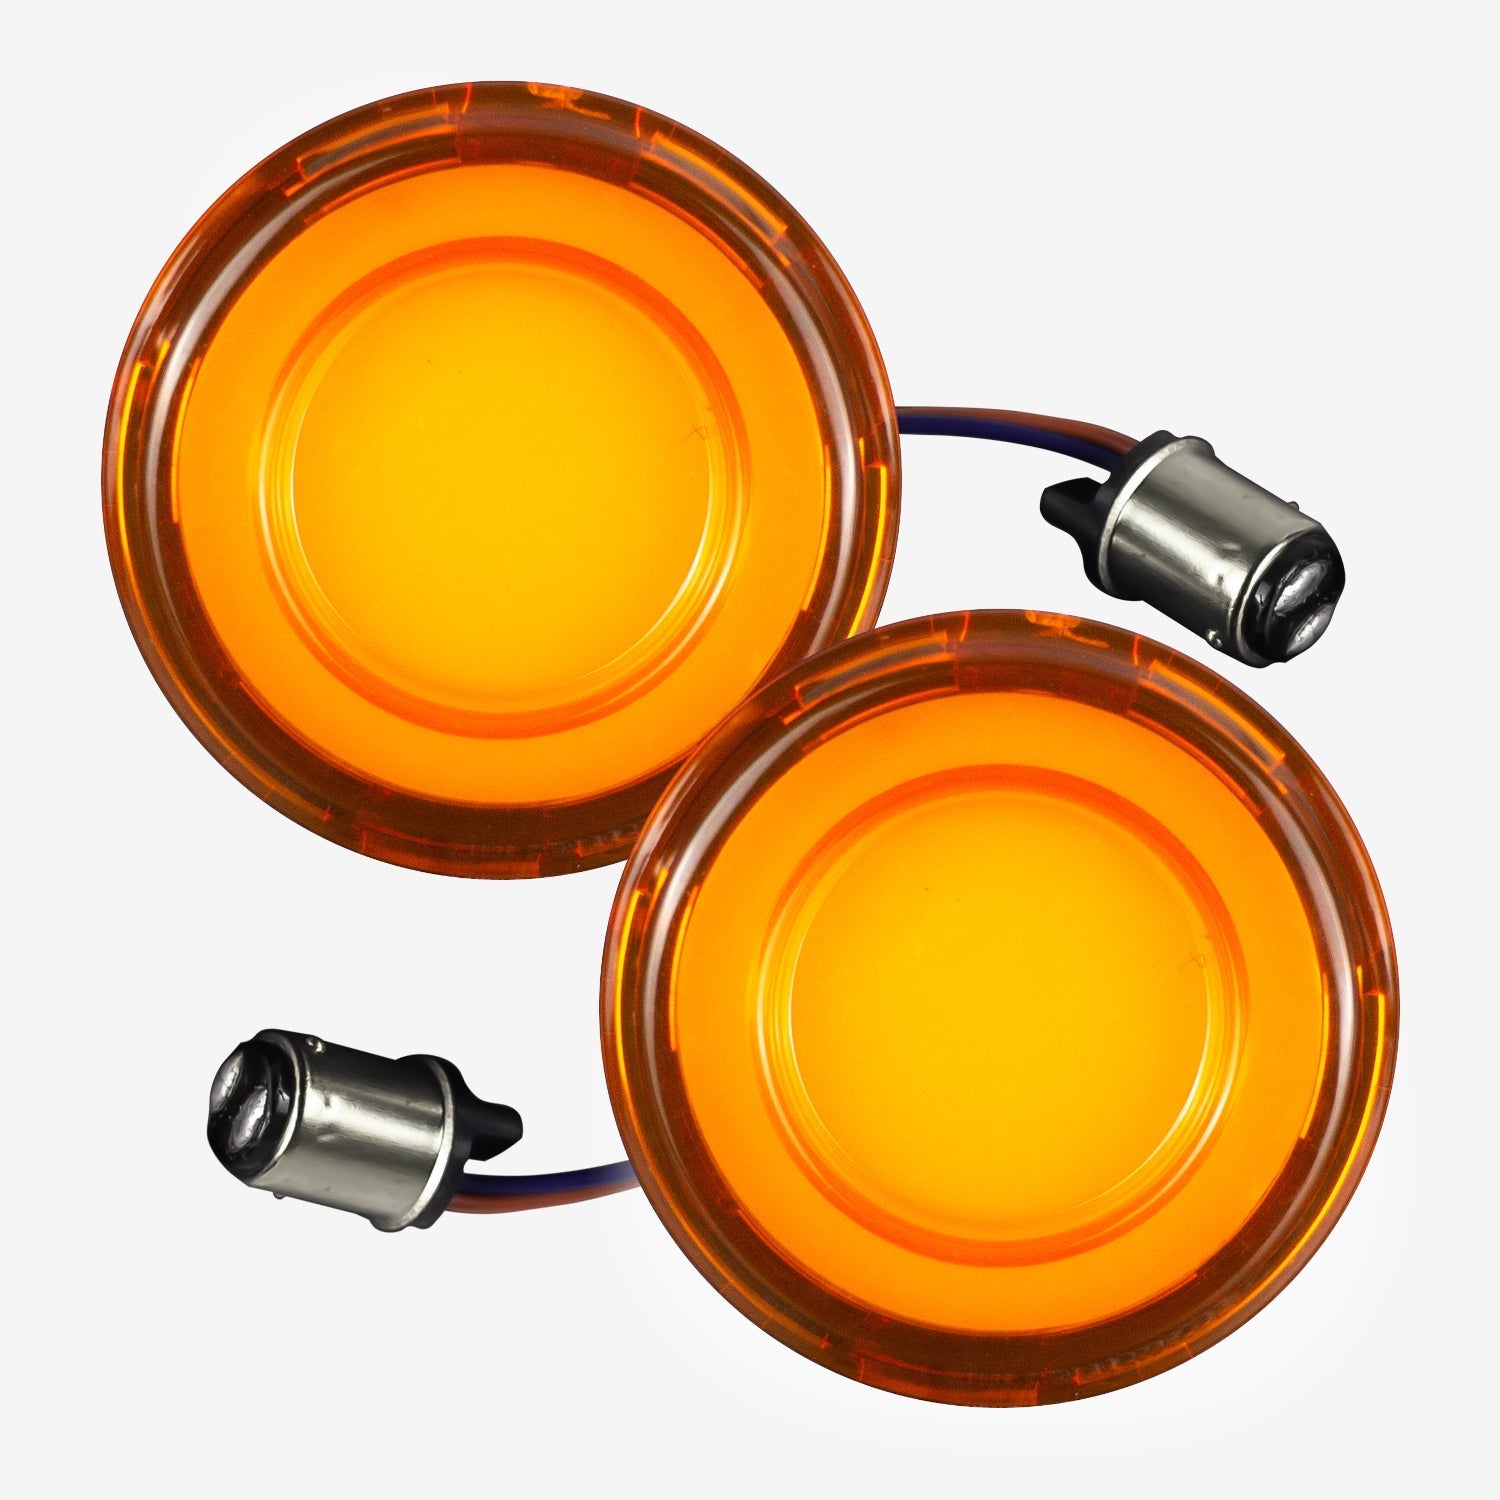 1 Set Front & Rear Motorcycle Turn Signals Blinker Lamp Amber